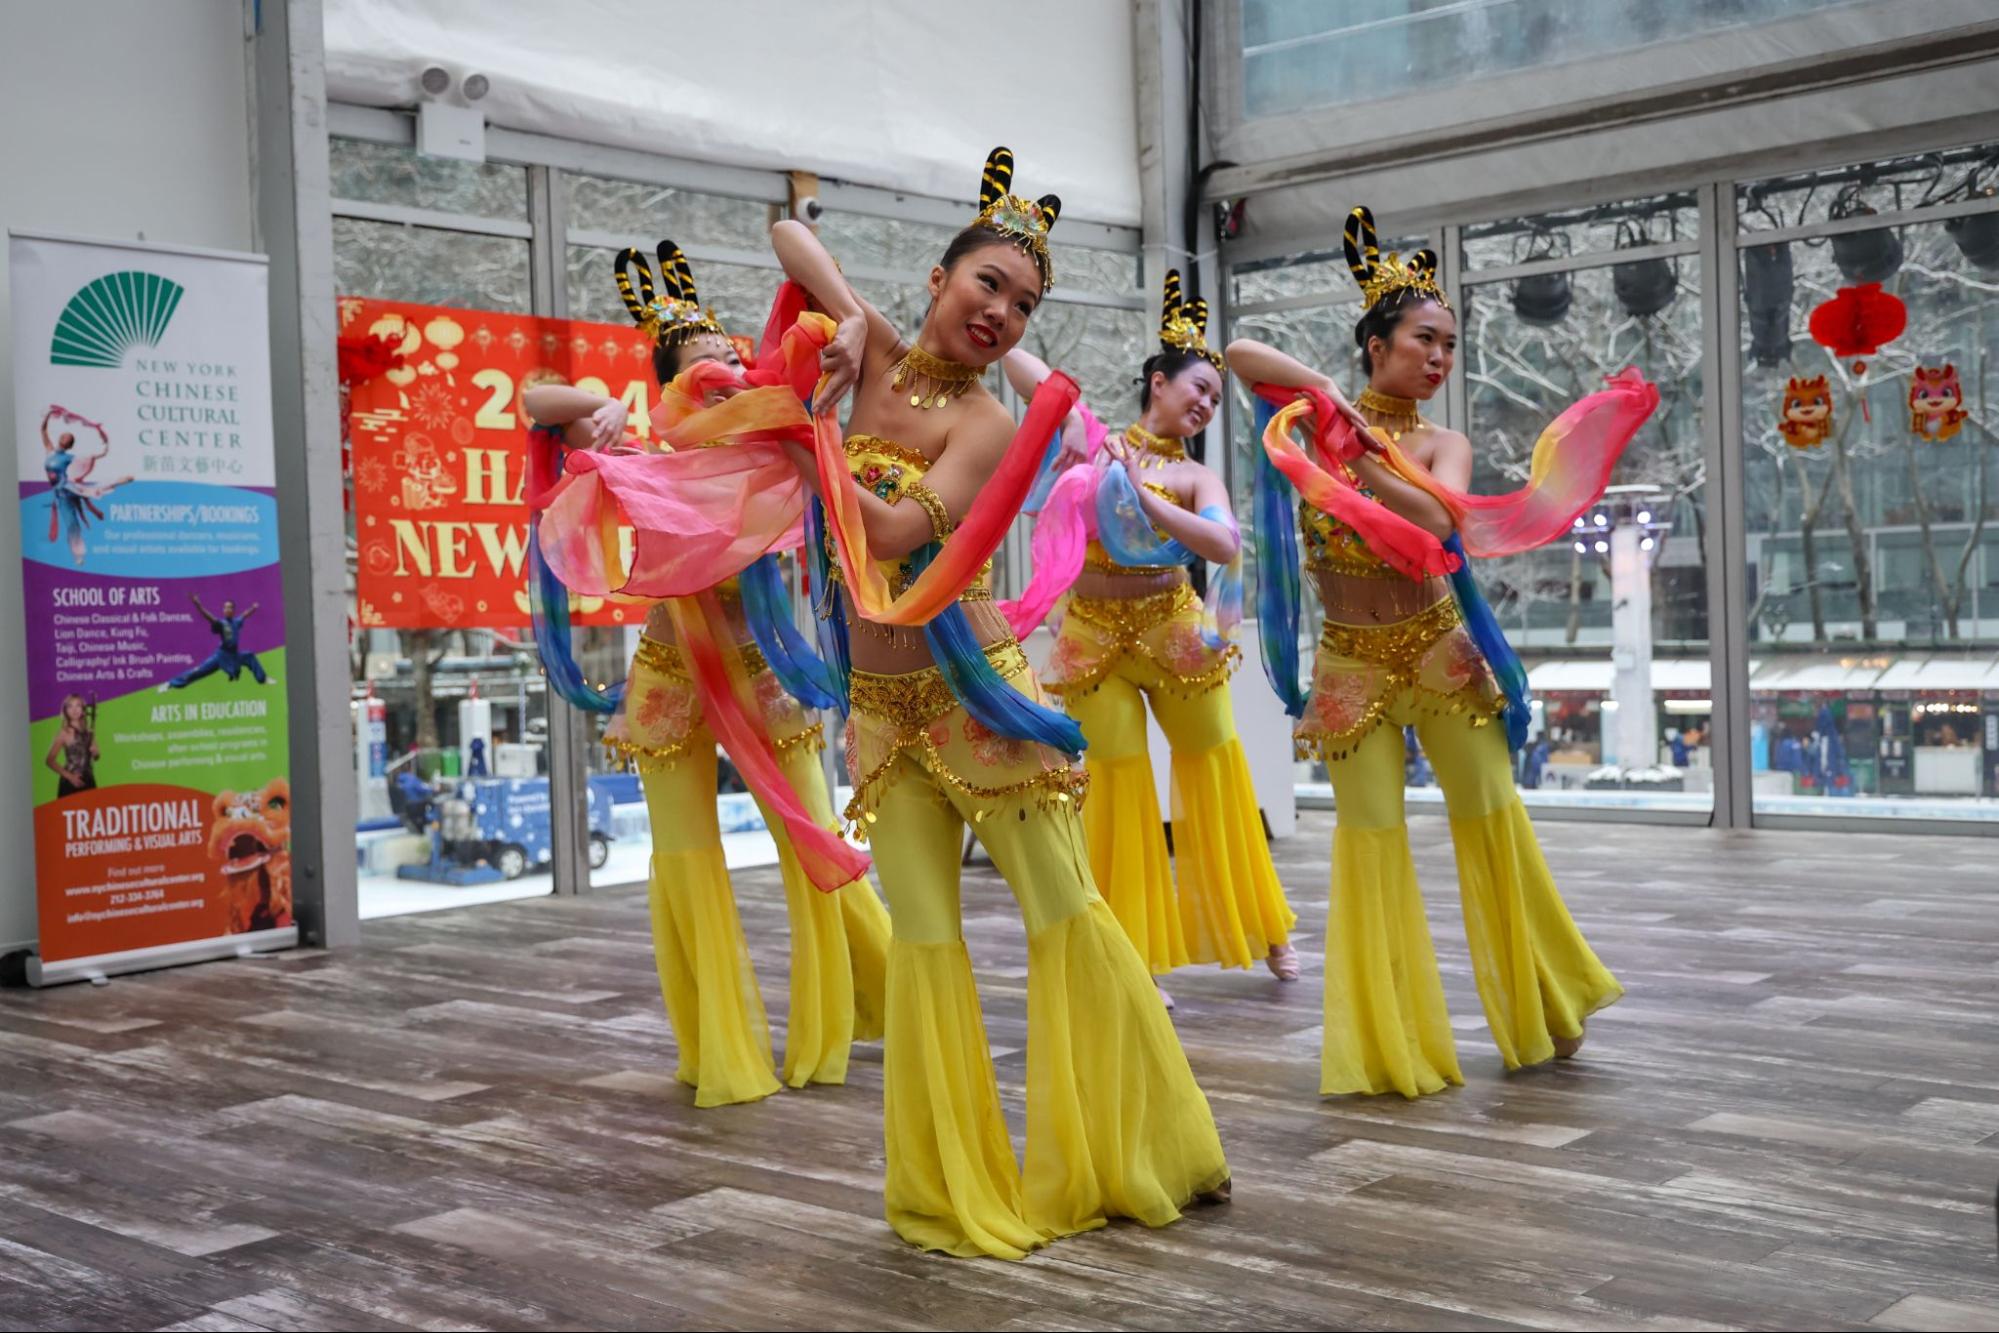 Four dancers wearing yellow outfits perform a dance in a room while holding red and blue ribbons.